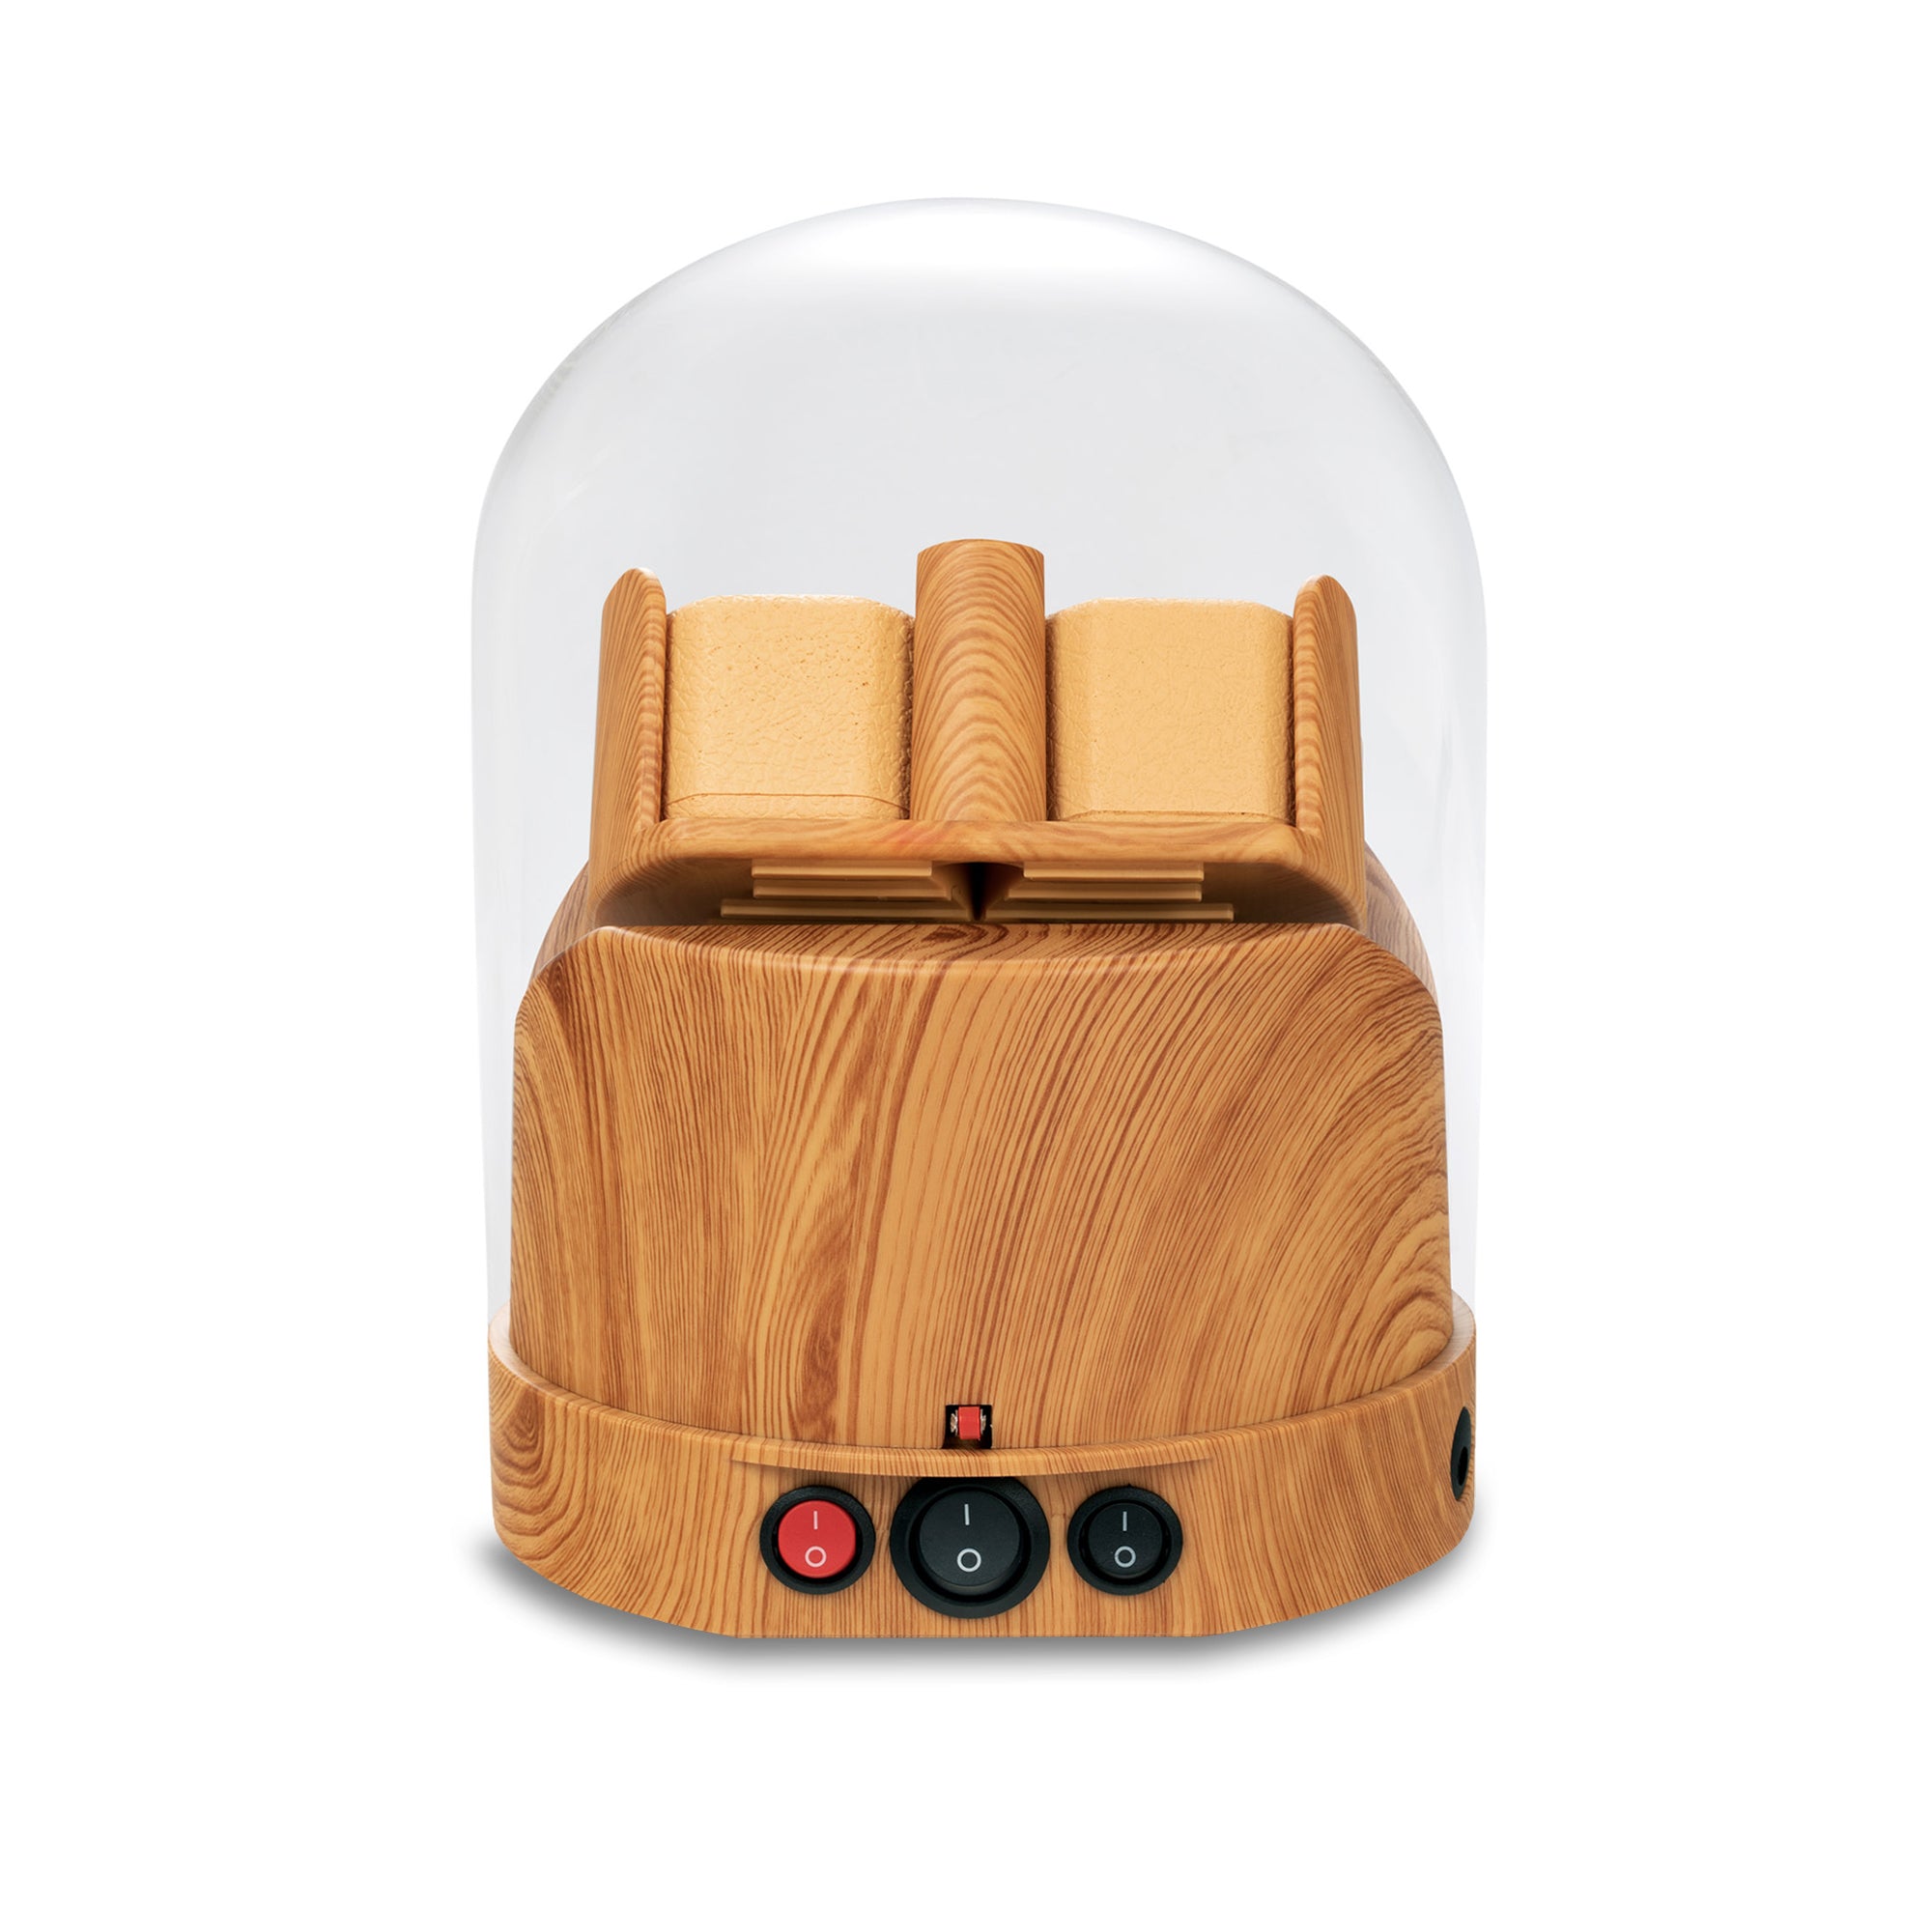 Observatory Dual Slot Watch Winder - Maple